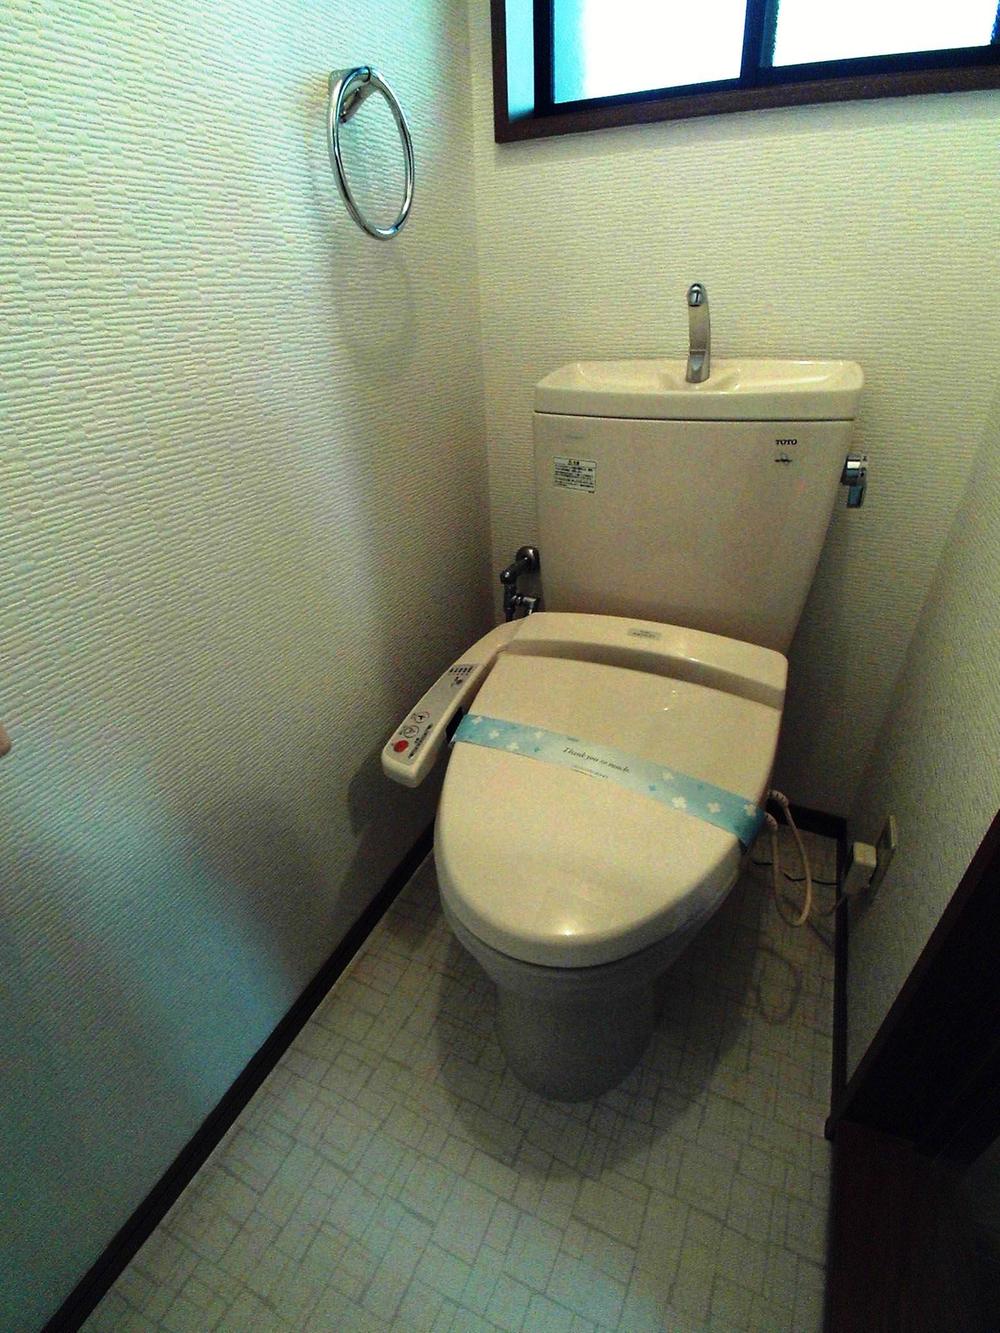 Toilet. Of course renovation completed